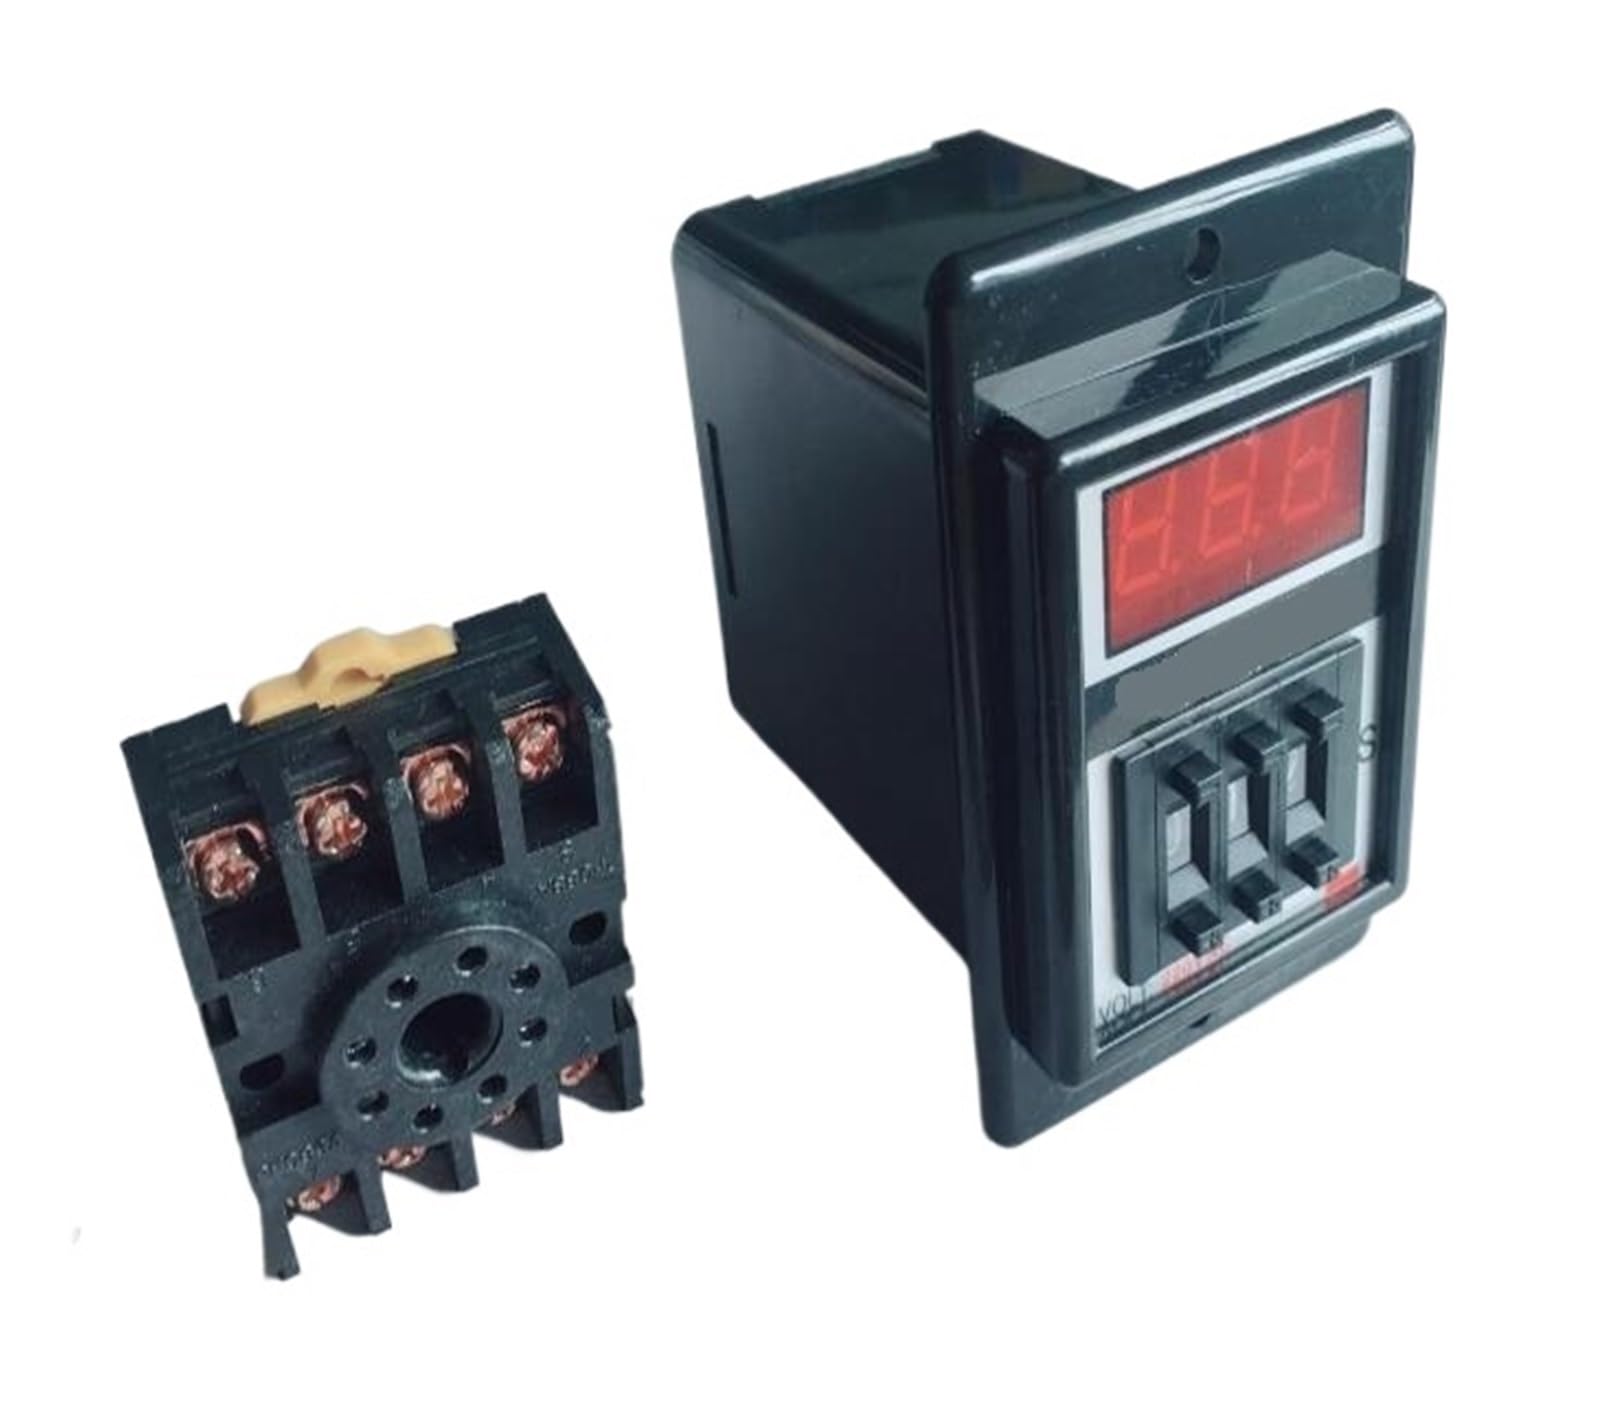 1-999S 1-99.9S 1-999M digits programmable timer delay relay ASY-3D Delay Timer Time Relay 8PIN with base NWPNLXEA(ASY-3D 999M,AC110V) von NWPNLXEA